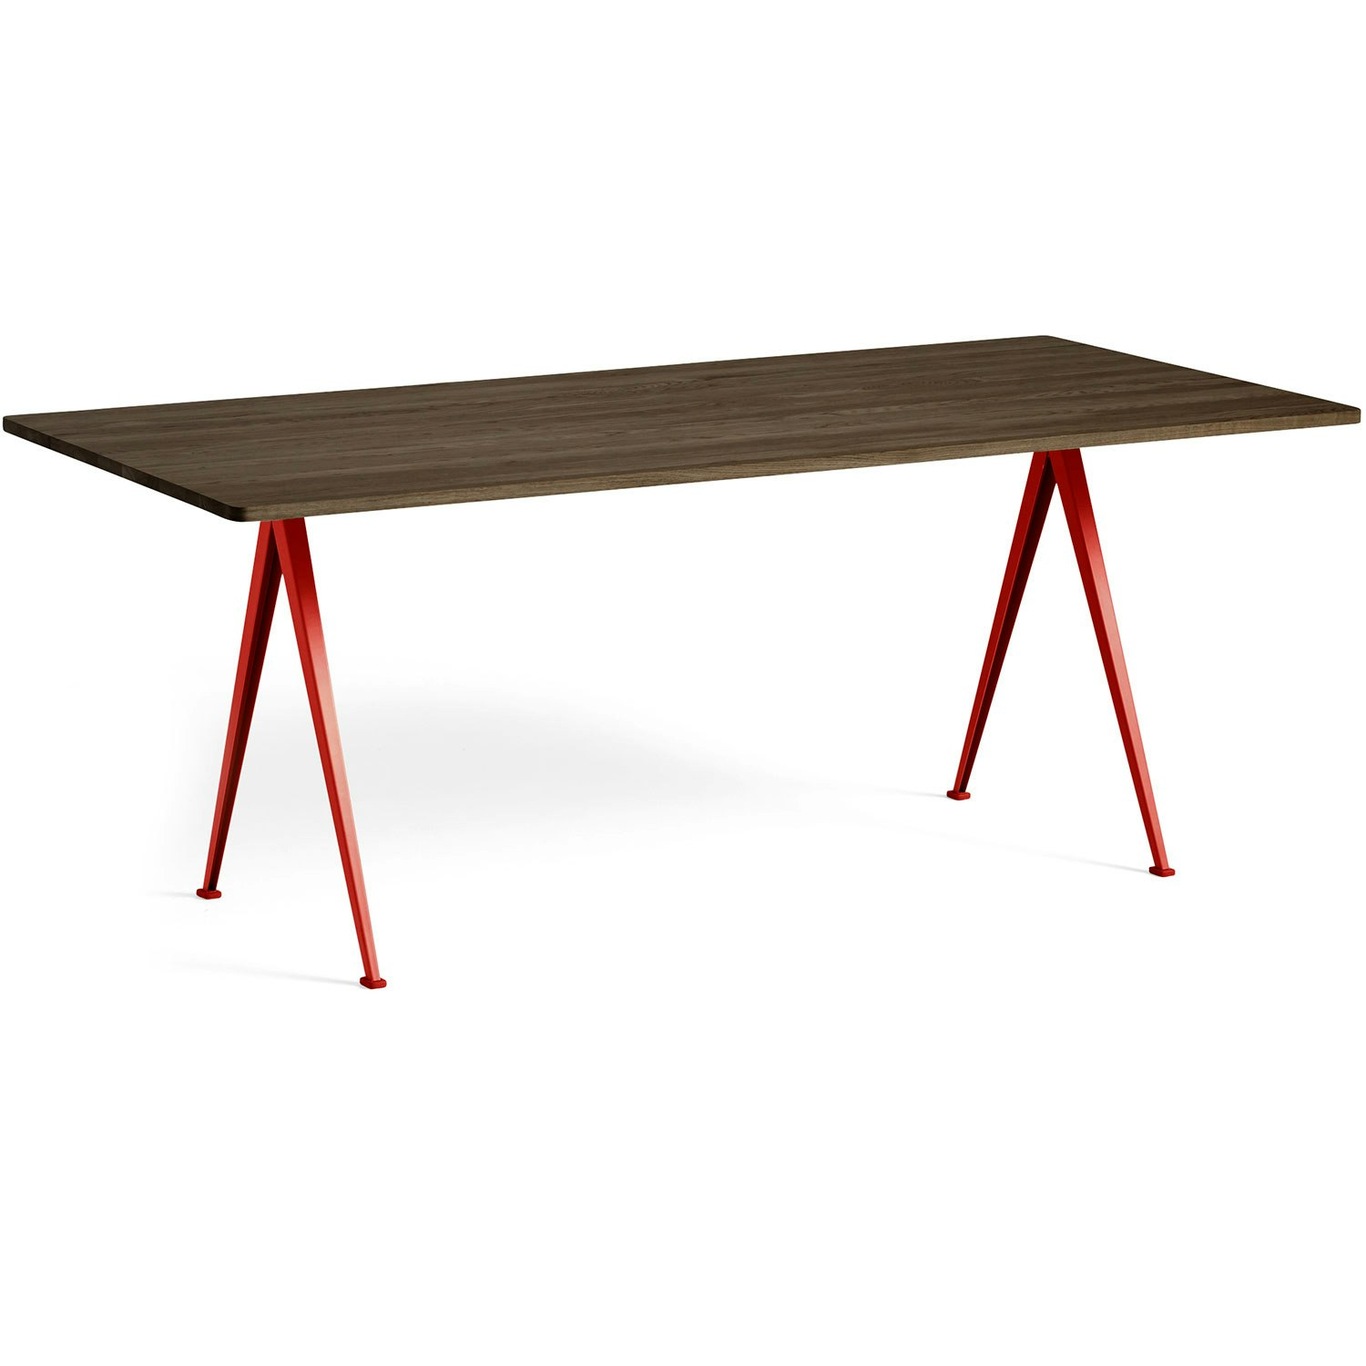 Pyramid 02 Dining Table 85x190 cm, Tomato Red / Dark Oiled Oak